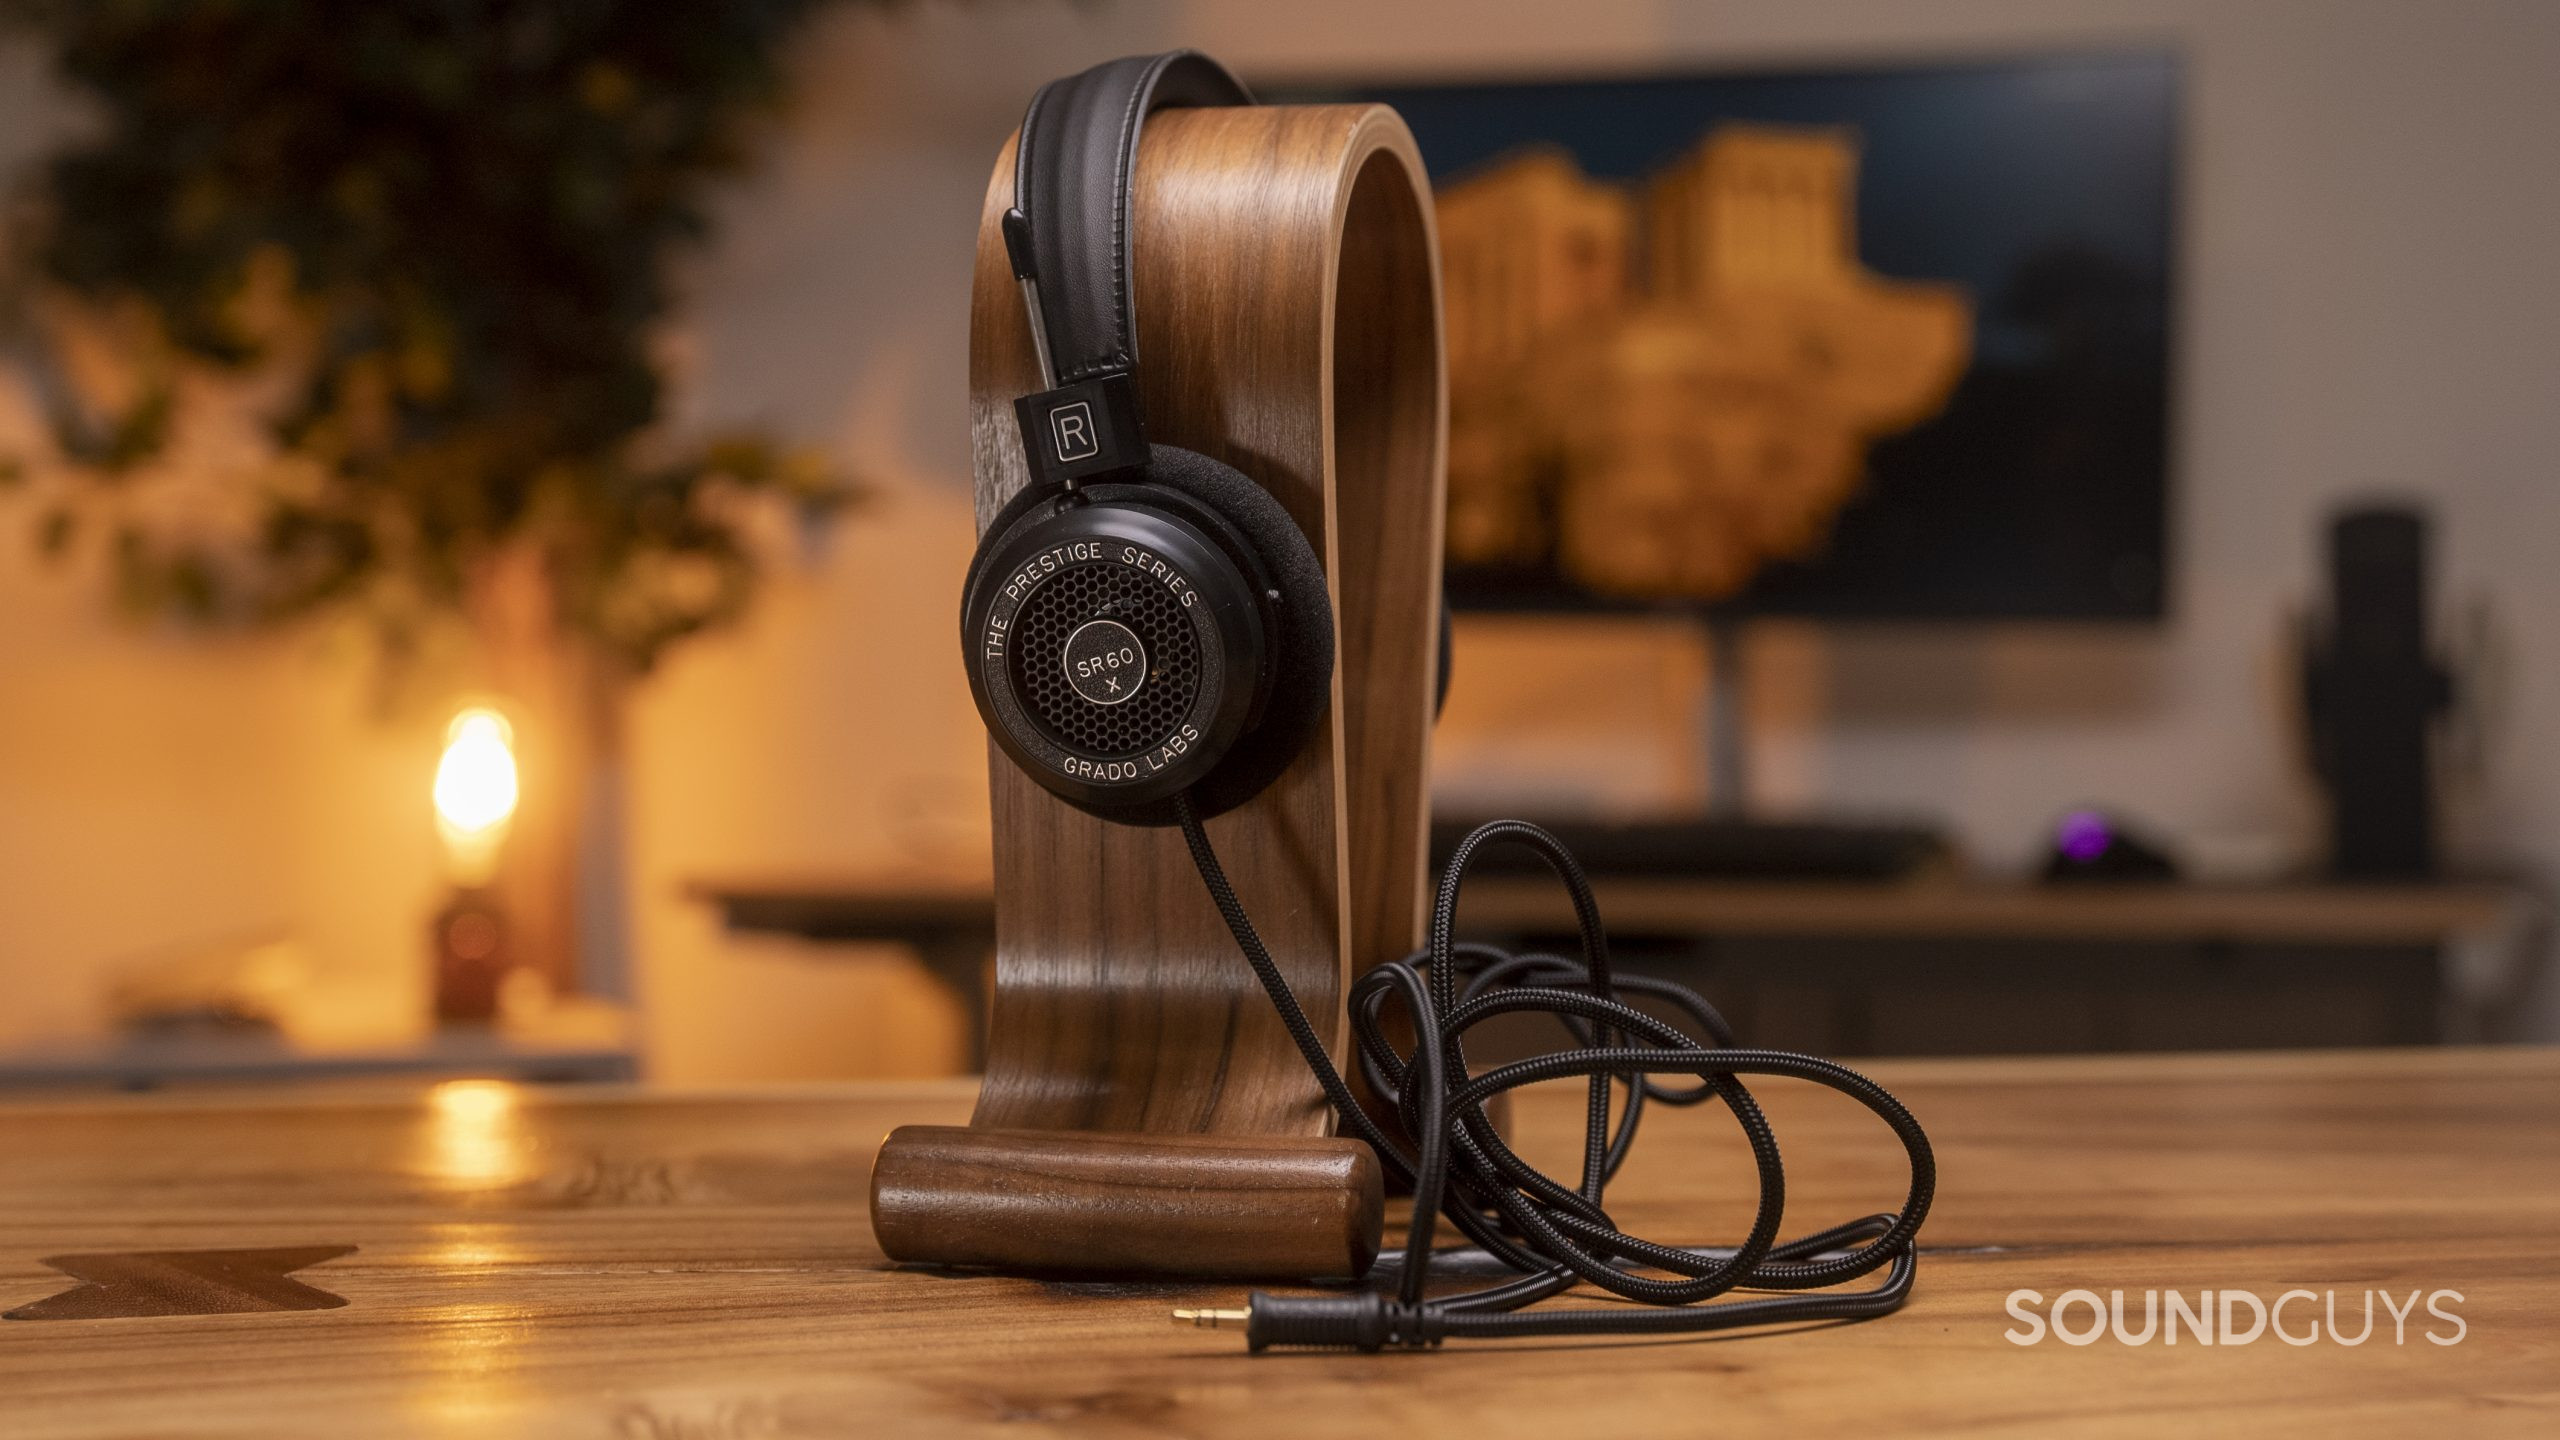 The Grado SR60x in black on top of an omega headphone stand.